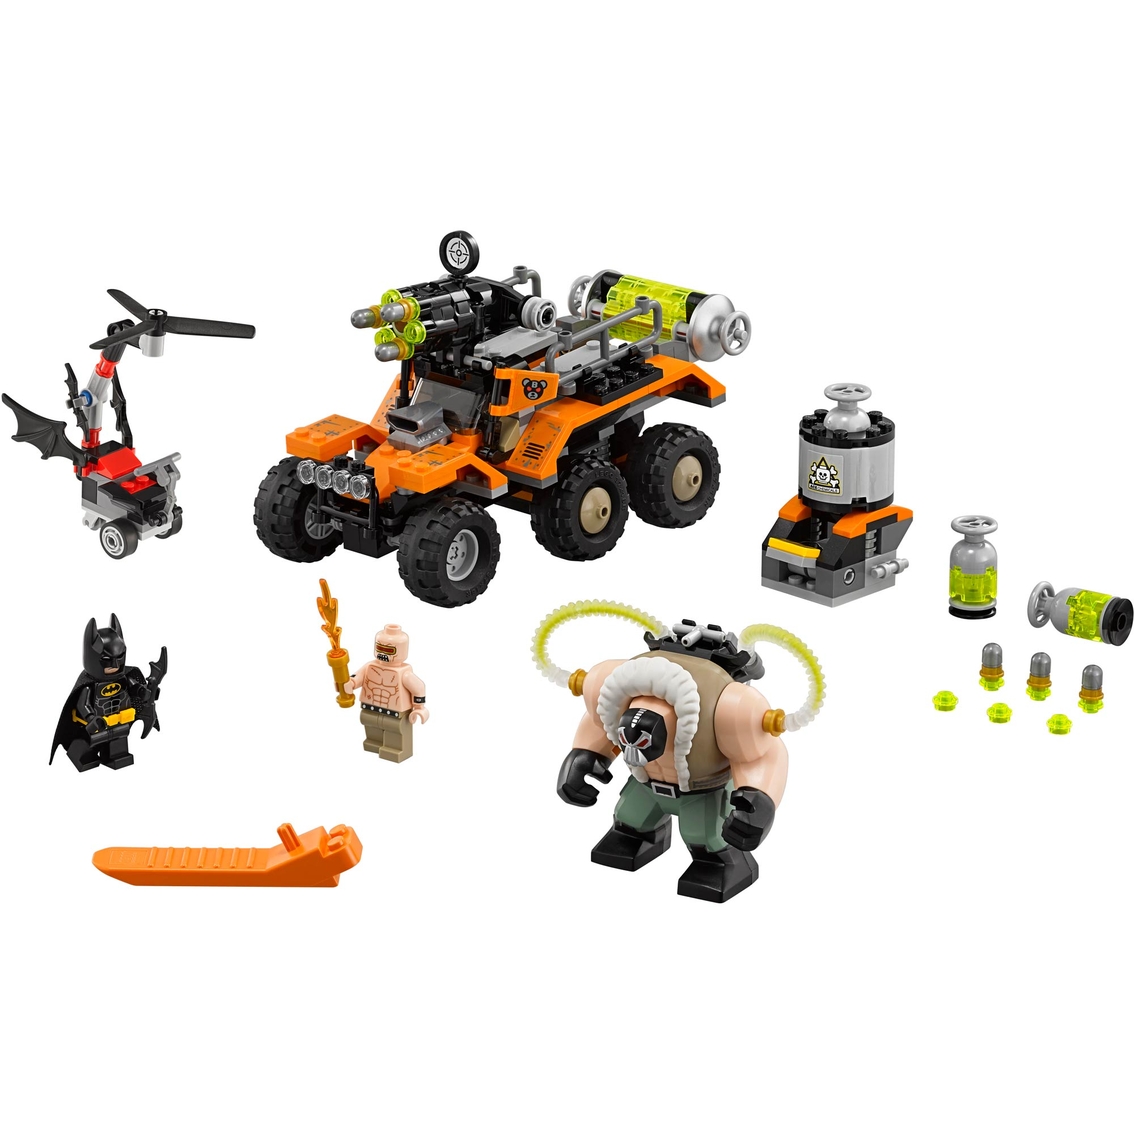 LEGO The Batman Movie Bane Toxic Truck Attack - Image 3 of 3